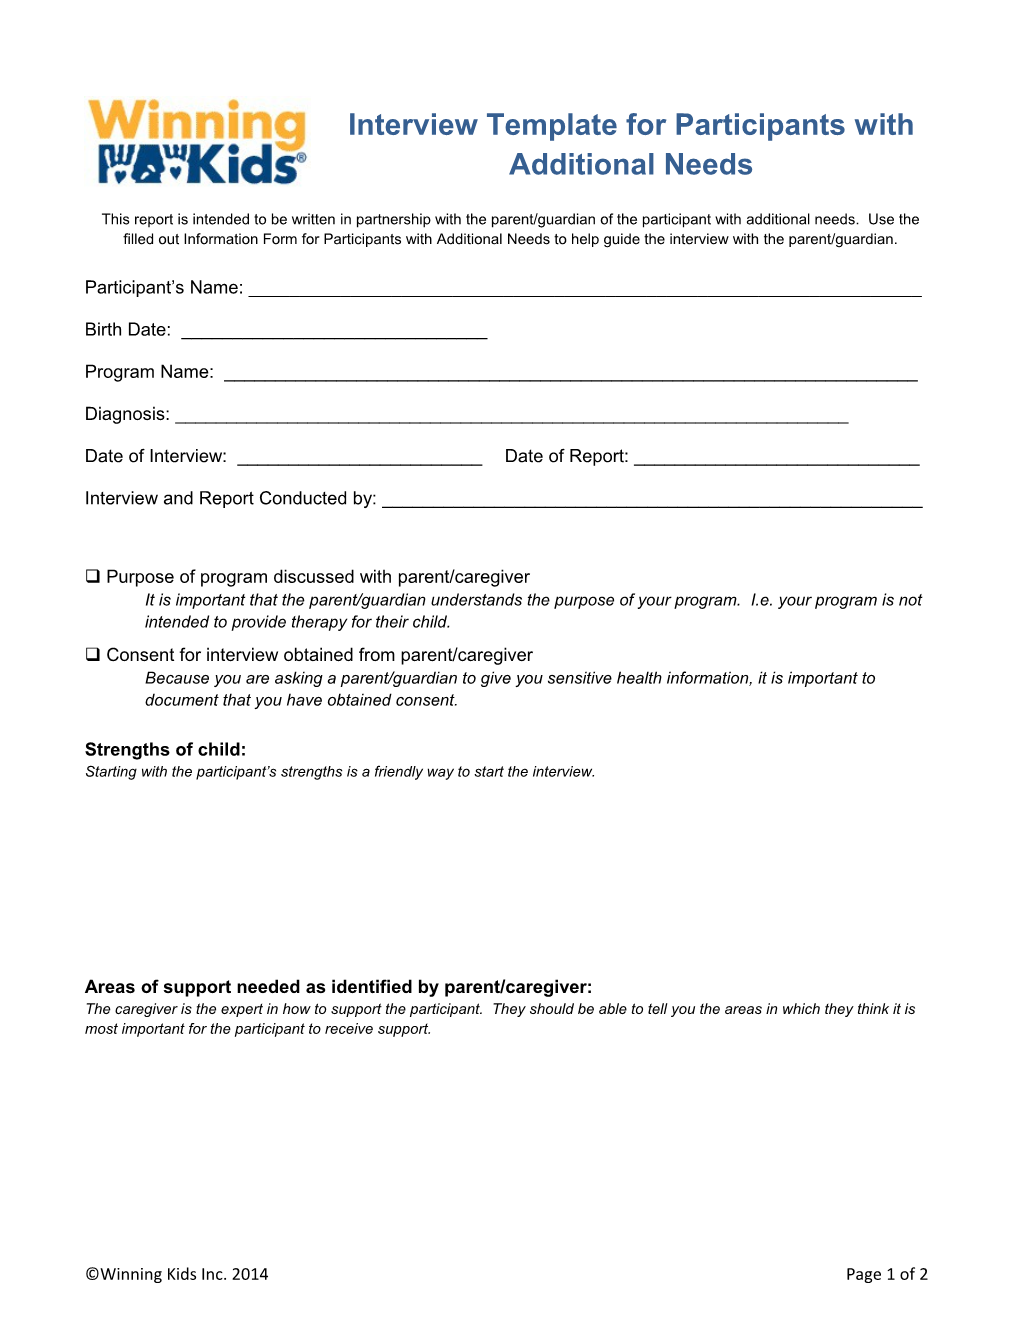 Interview Template for Participants with Additional Needs